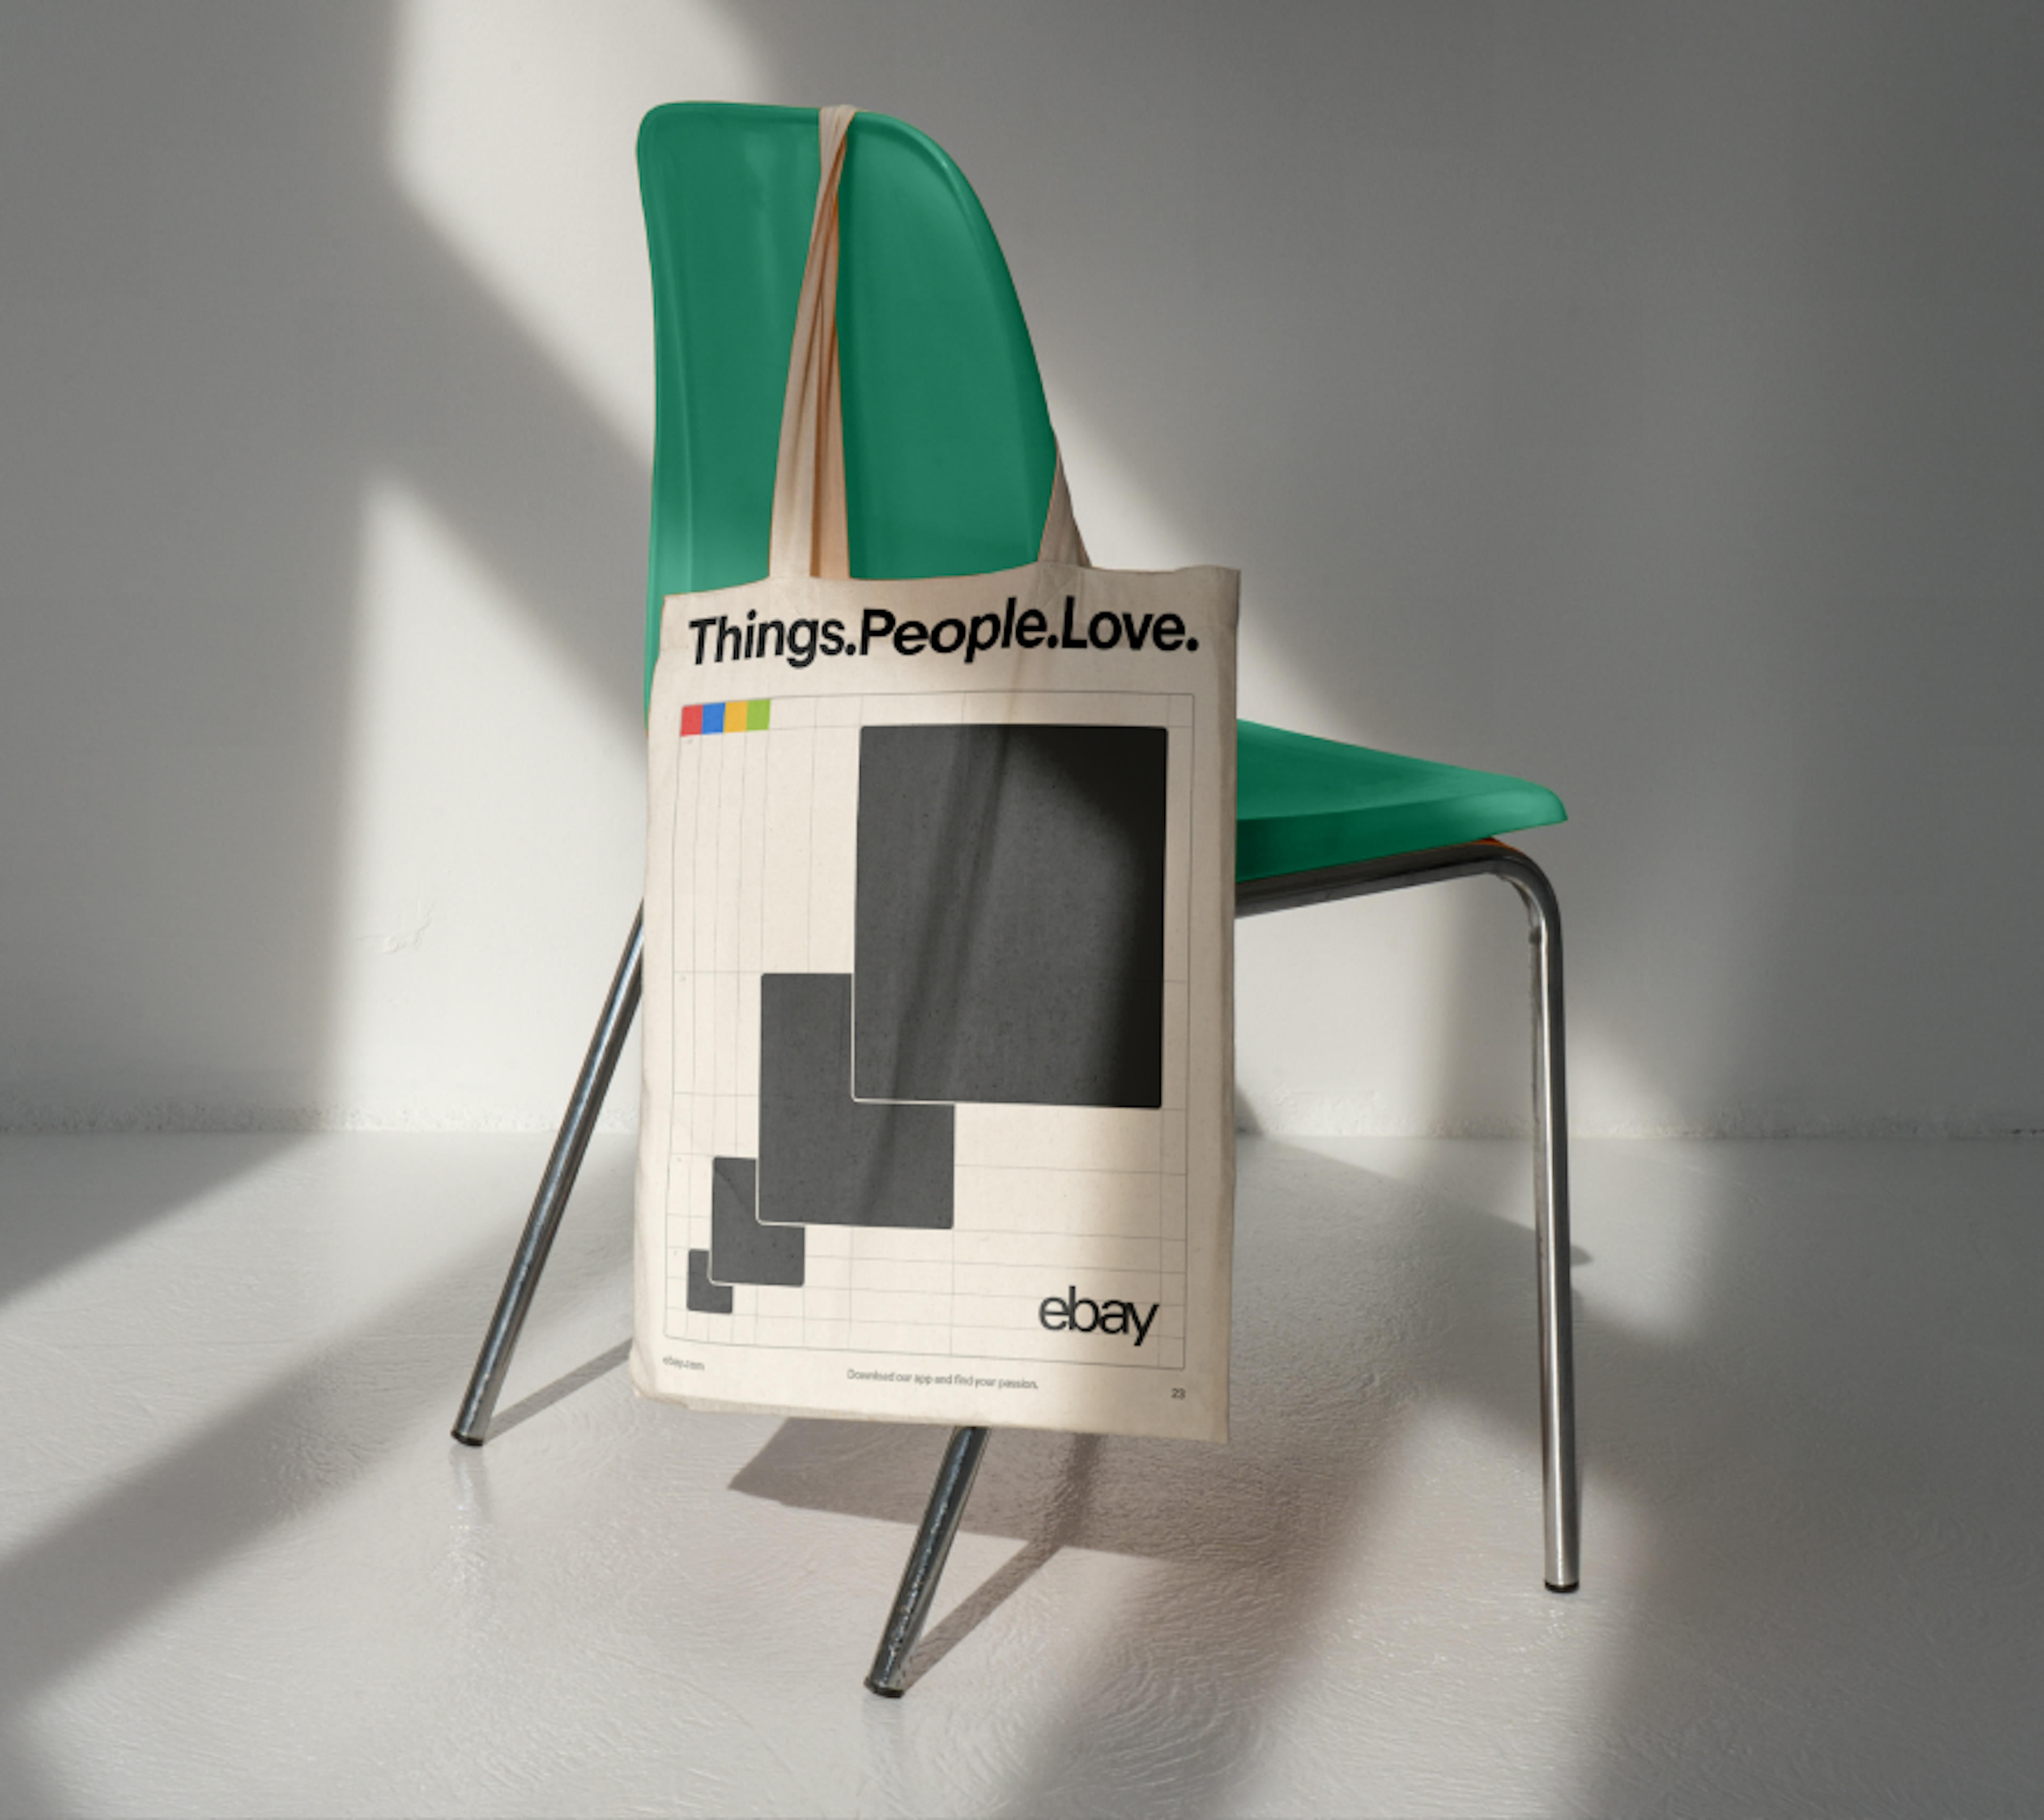 An off-white canvas tote bag with the large tagline “Things.People.Love” at the top above a graphic of growing shapes. It is hanging off the back of a modern green chair.